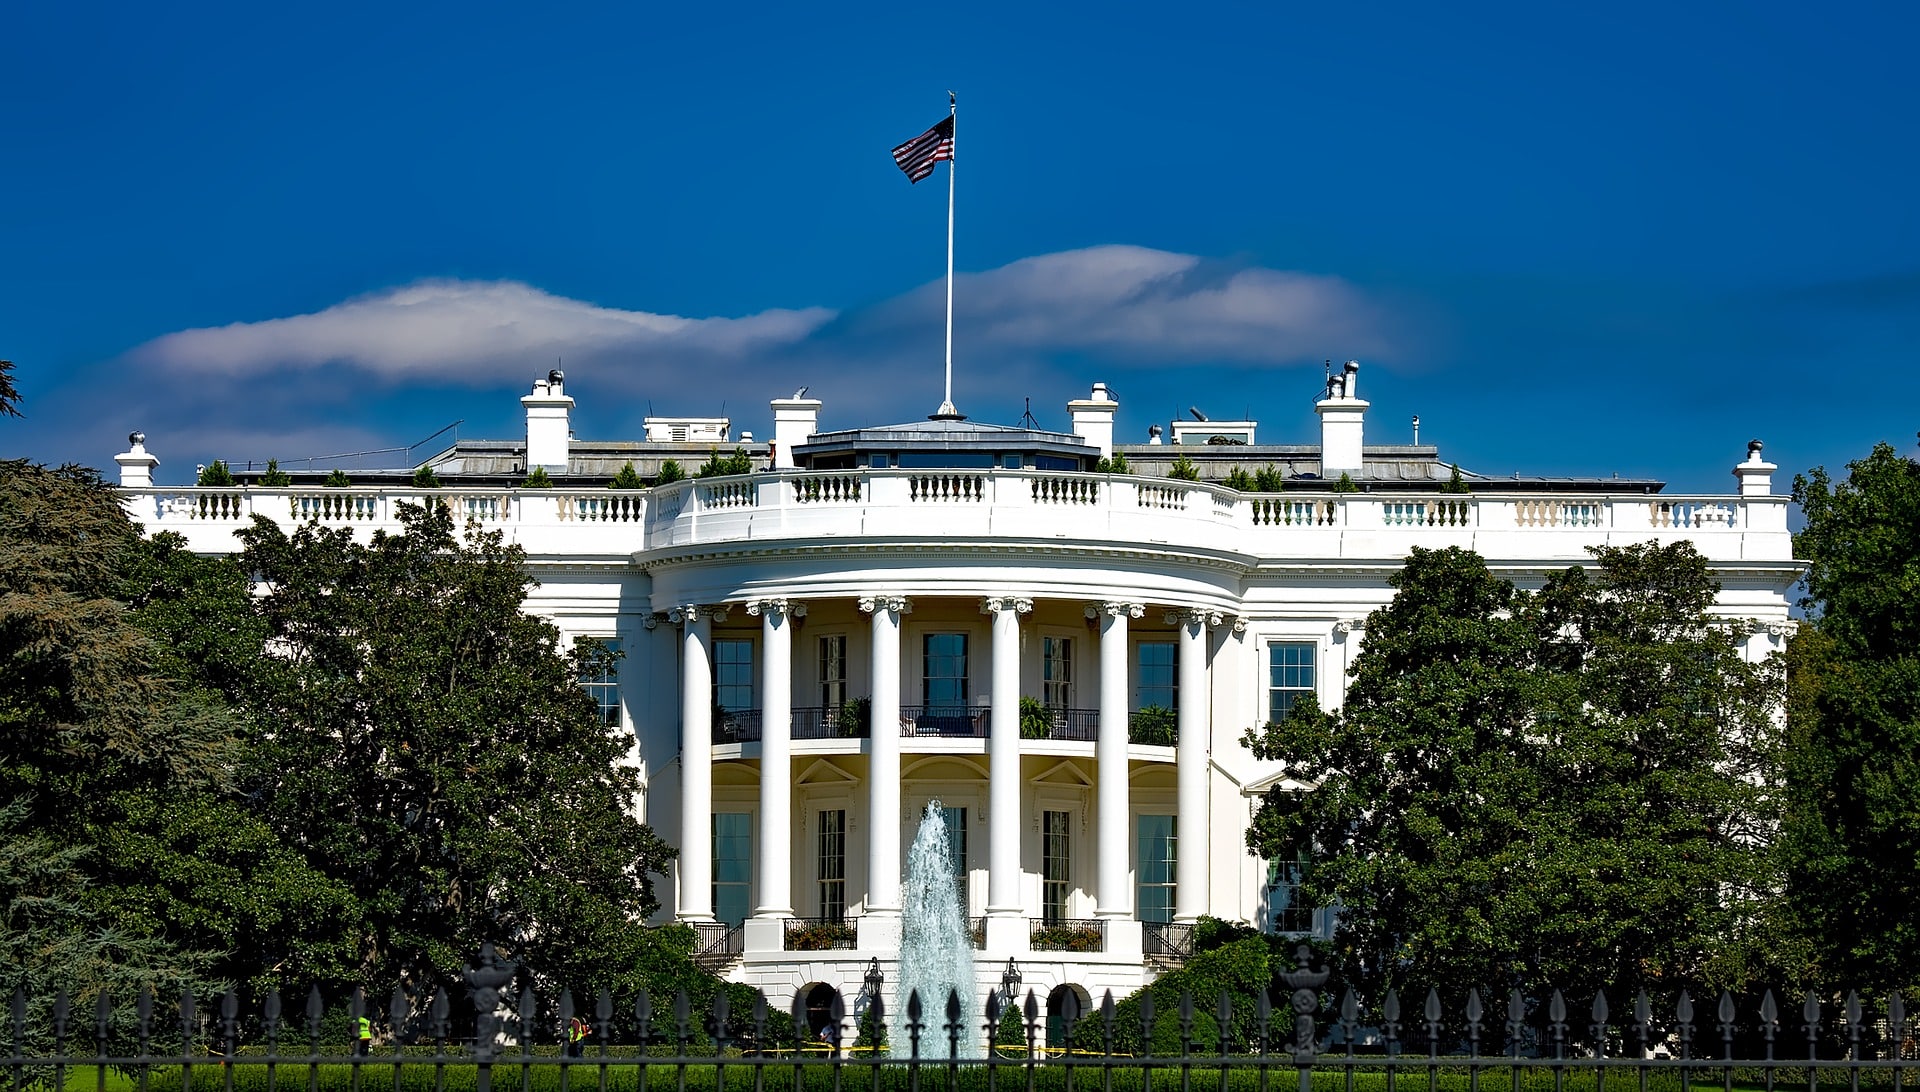 5 Presidential Moving Facts You Probably Don't Know About